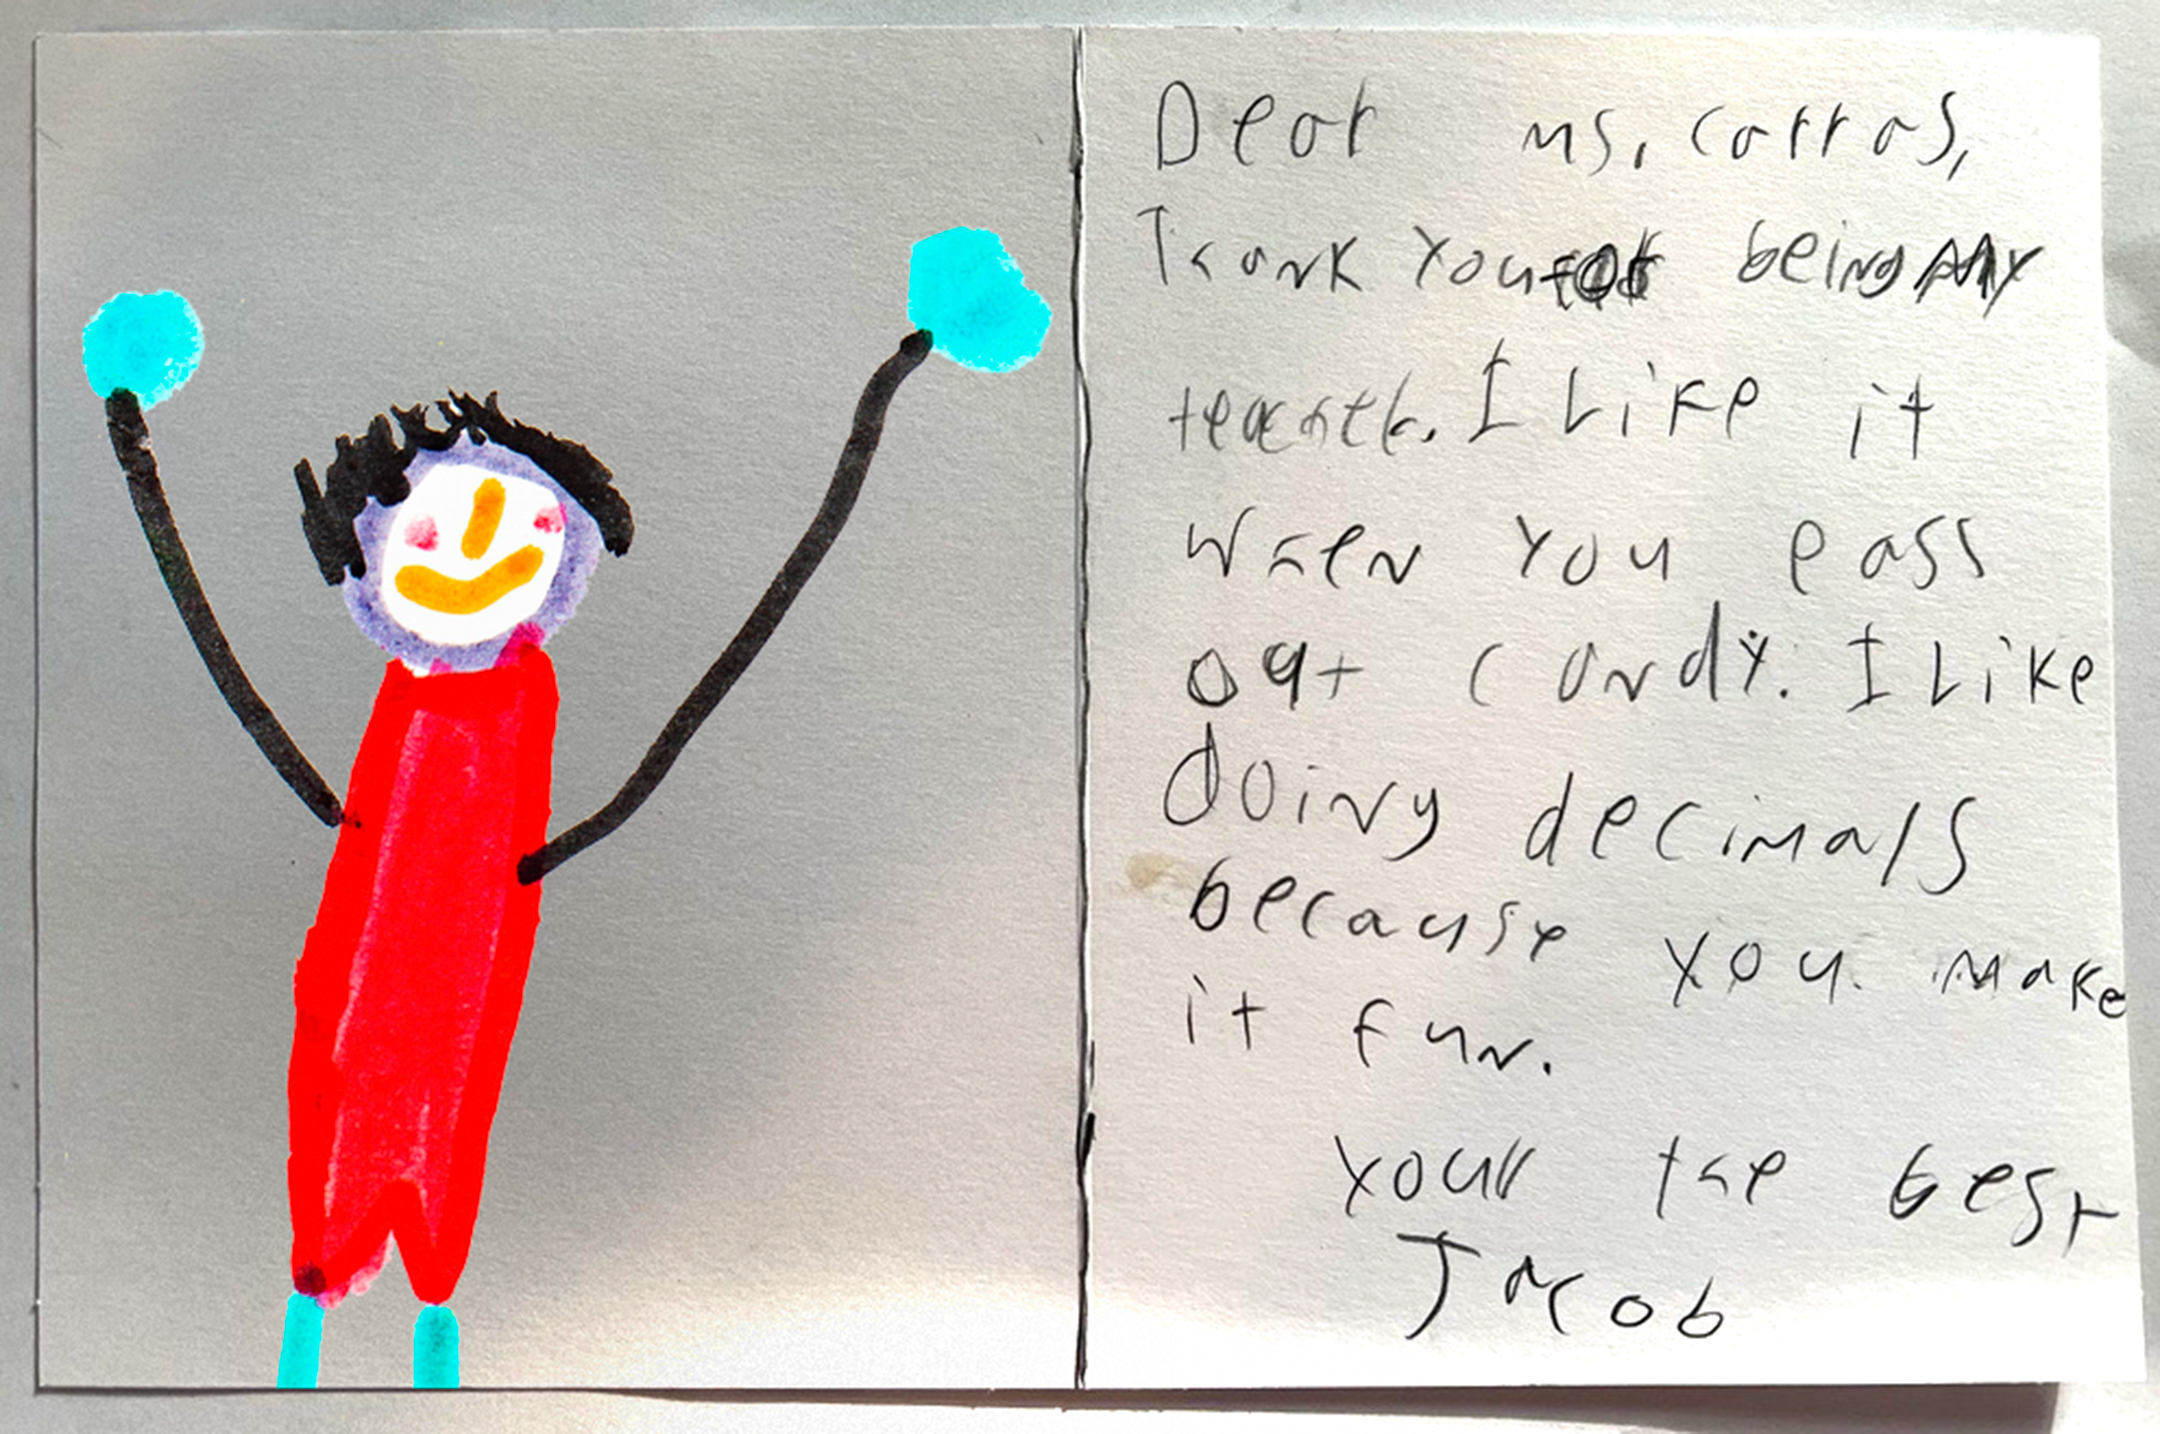 Child's drawing of a boy on the left, letter to a teacher on the right, the text of which is cited in the accompanying blurb that follows the image